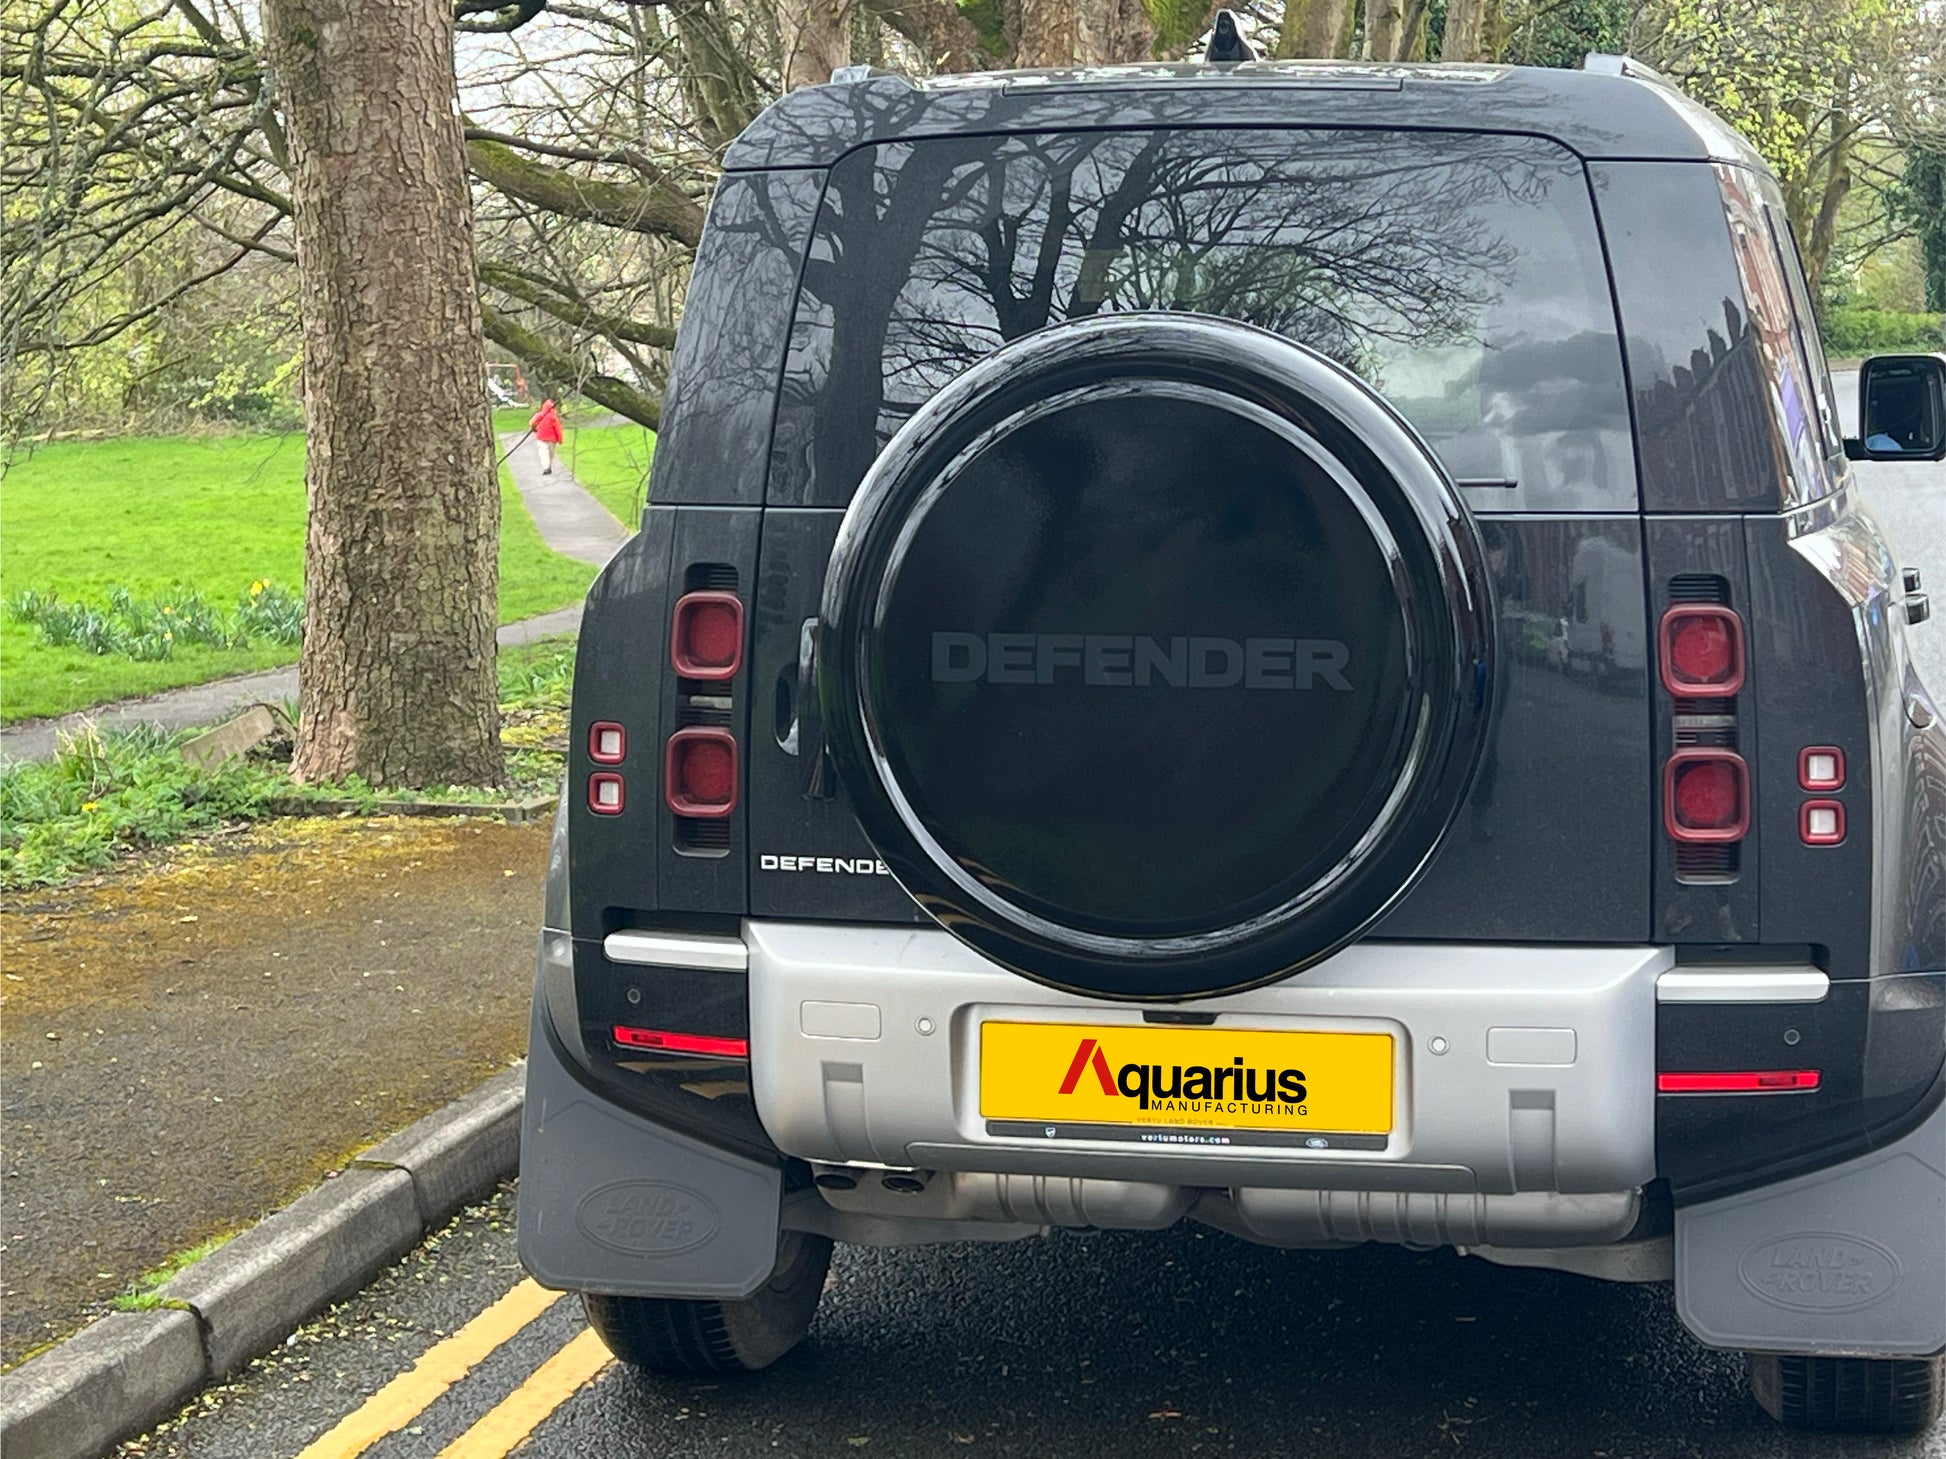 Black new shape Land Rover Defender parked next to a green park with trees, Aquarius gloss wheel cover printed "DEFENDER"